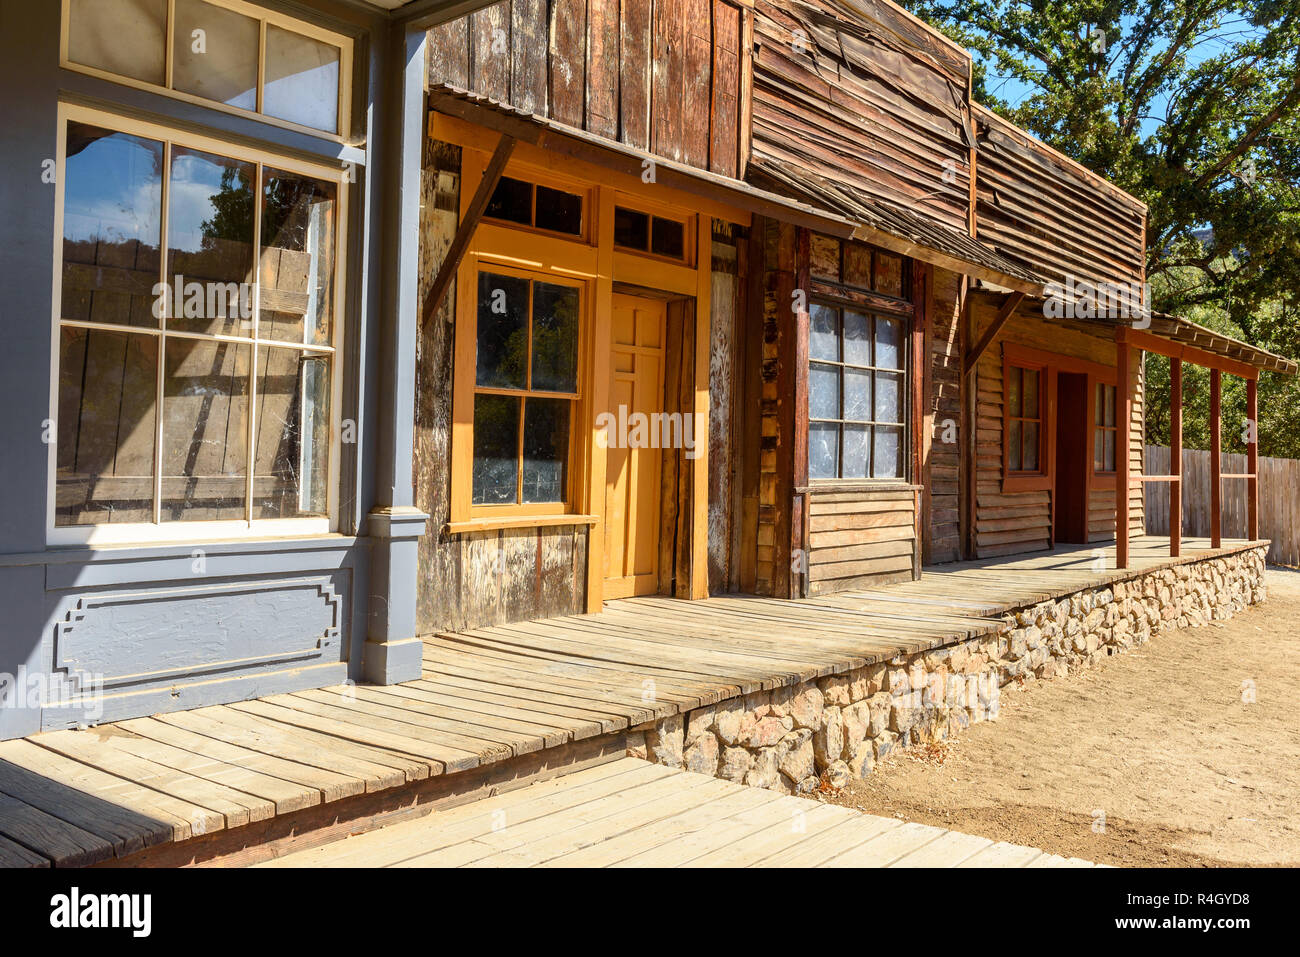 Los Angeles, California. November 29, 2017. Paramount Ranch which was destroyed and burnt out by Woolsey fire, November 29, 2017, Los Angeles, CA. Stock Photo